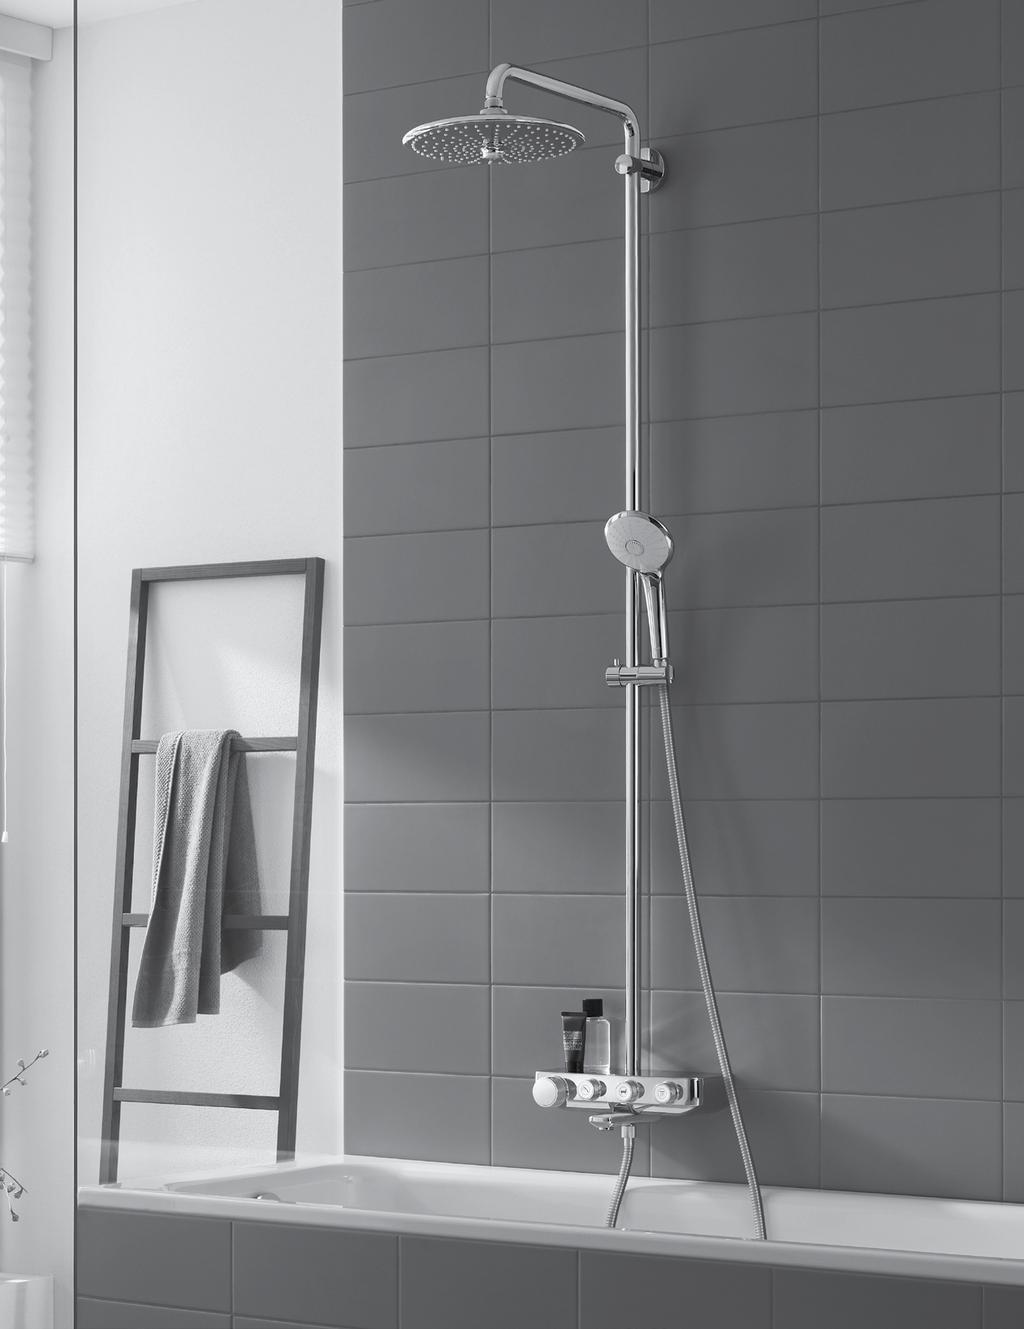 GROHE QUICKFIX EUPHORIA 260 SHOWER HEAD Jet spray For a 40% faster install, position upper bracket to use existing drilled holes.